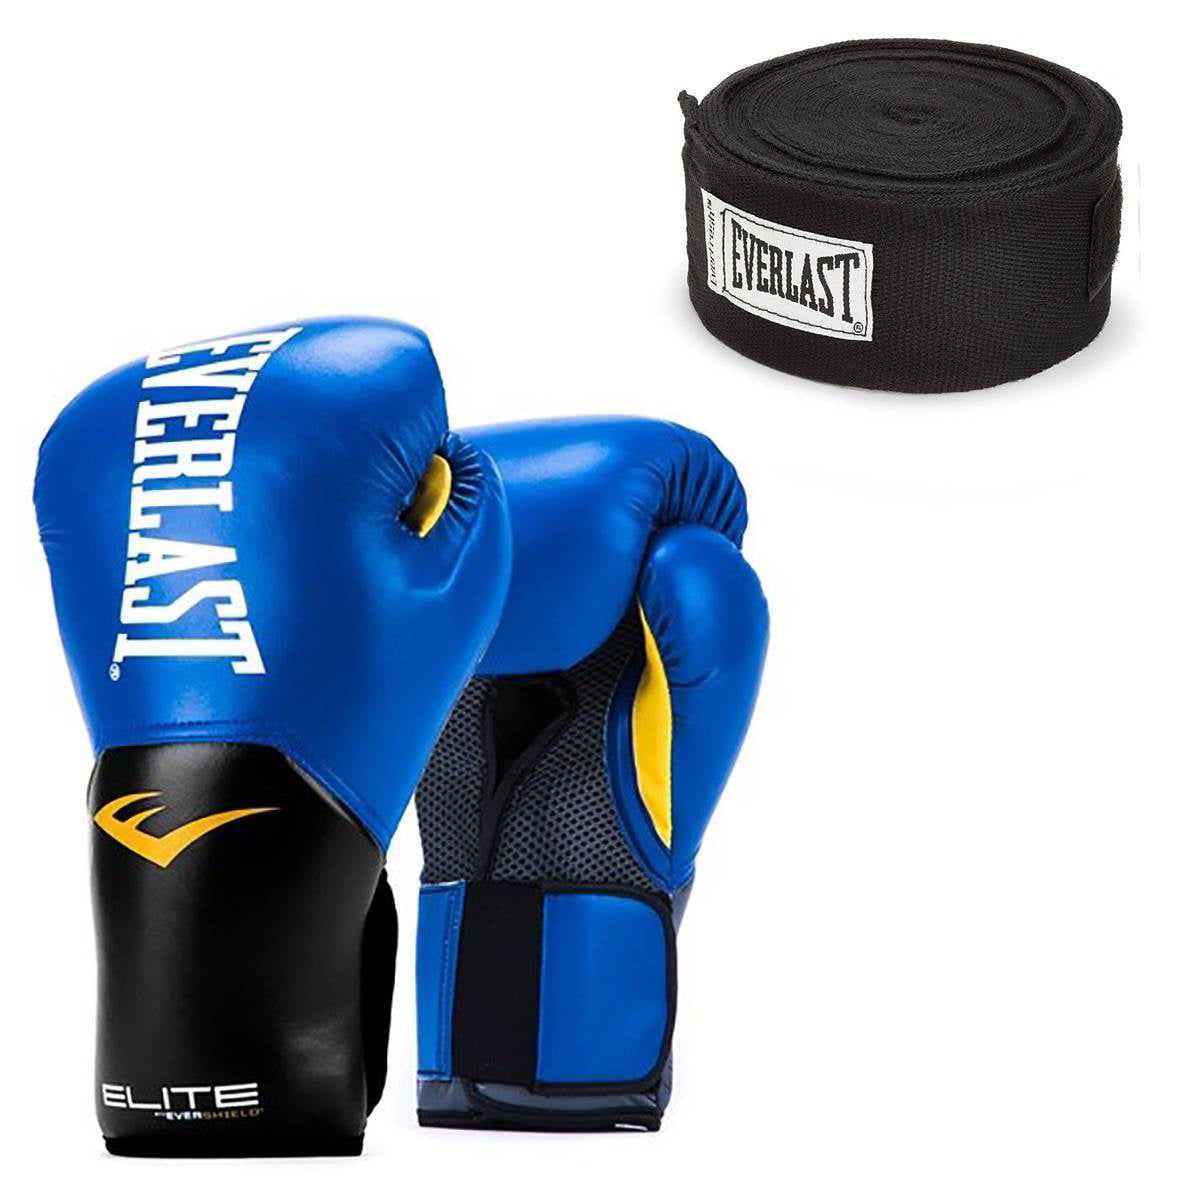 Never used Left Only Everlast Classic Boxing Training Gloves 